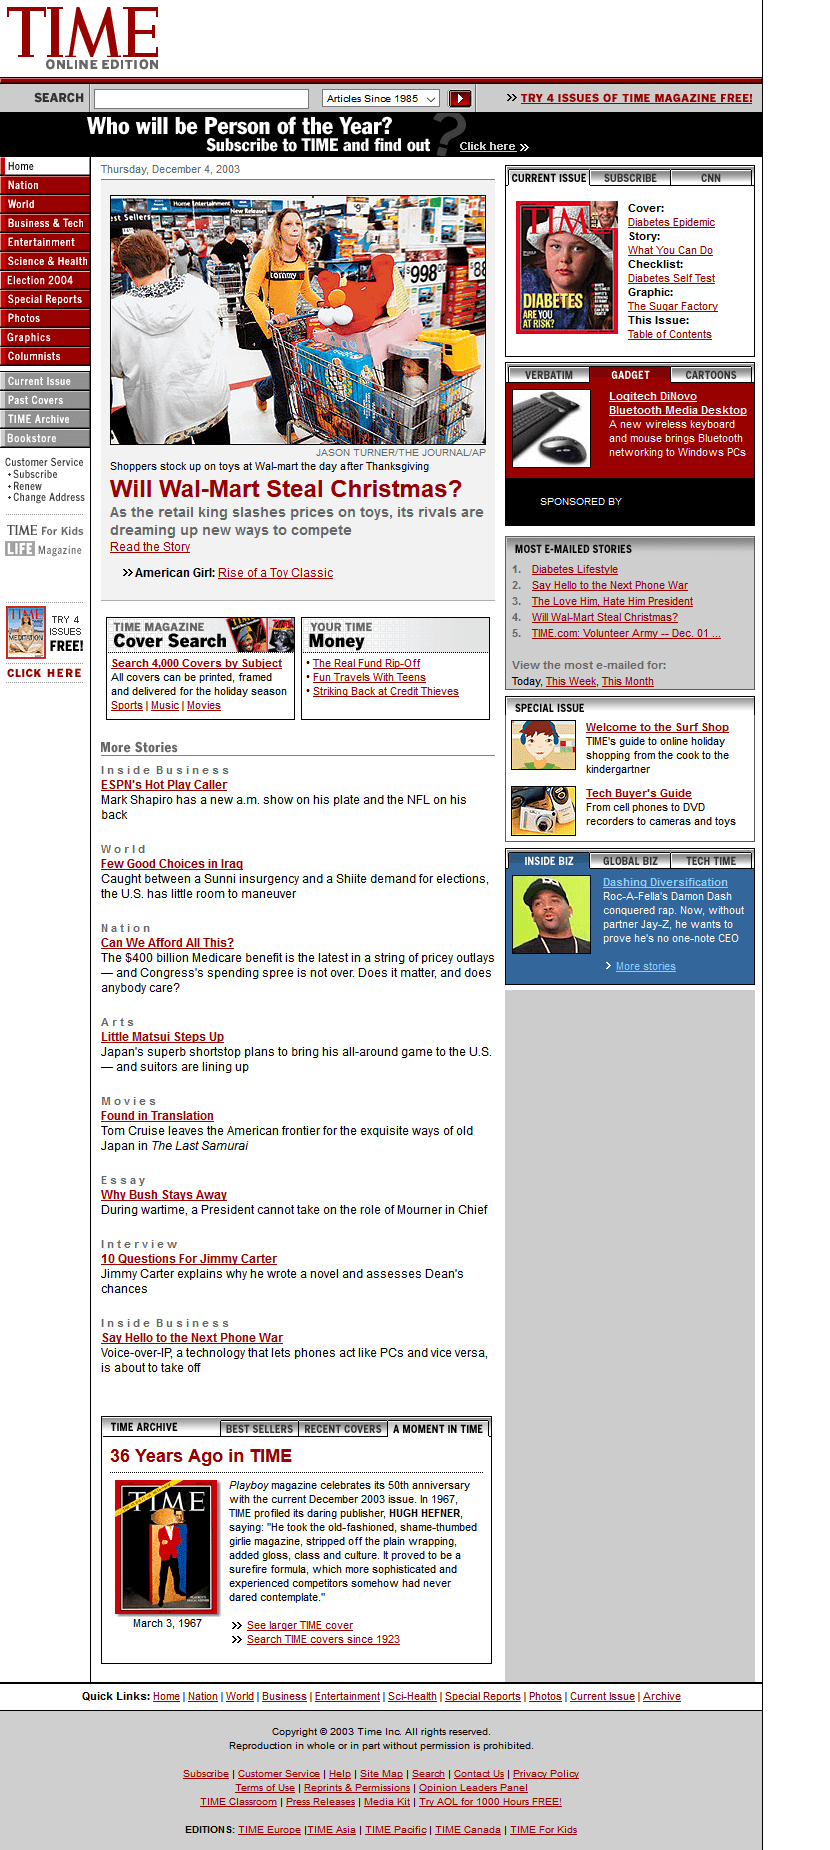 Time website in 2003